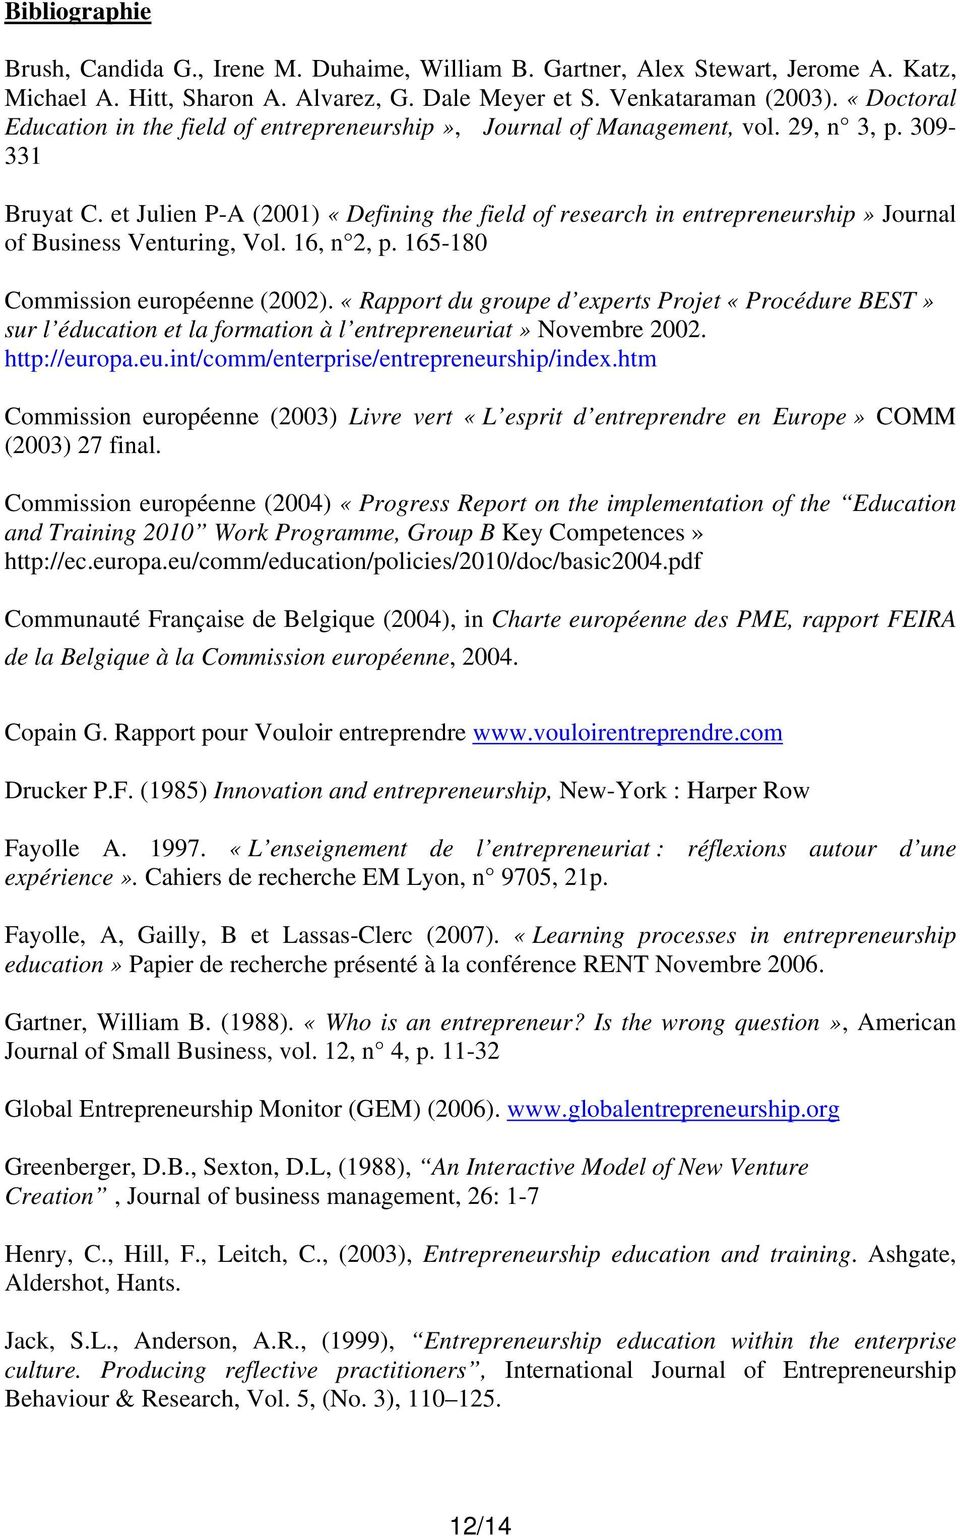 et Julien P-A (2001) «Defining the field of research in entrepreneurship» Journal of Business Venturing, Vol. 16, n 2, p. 165-180 Commission européenne (2002).